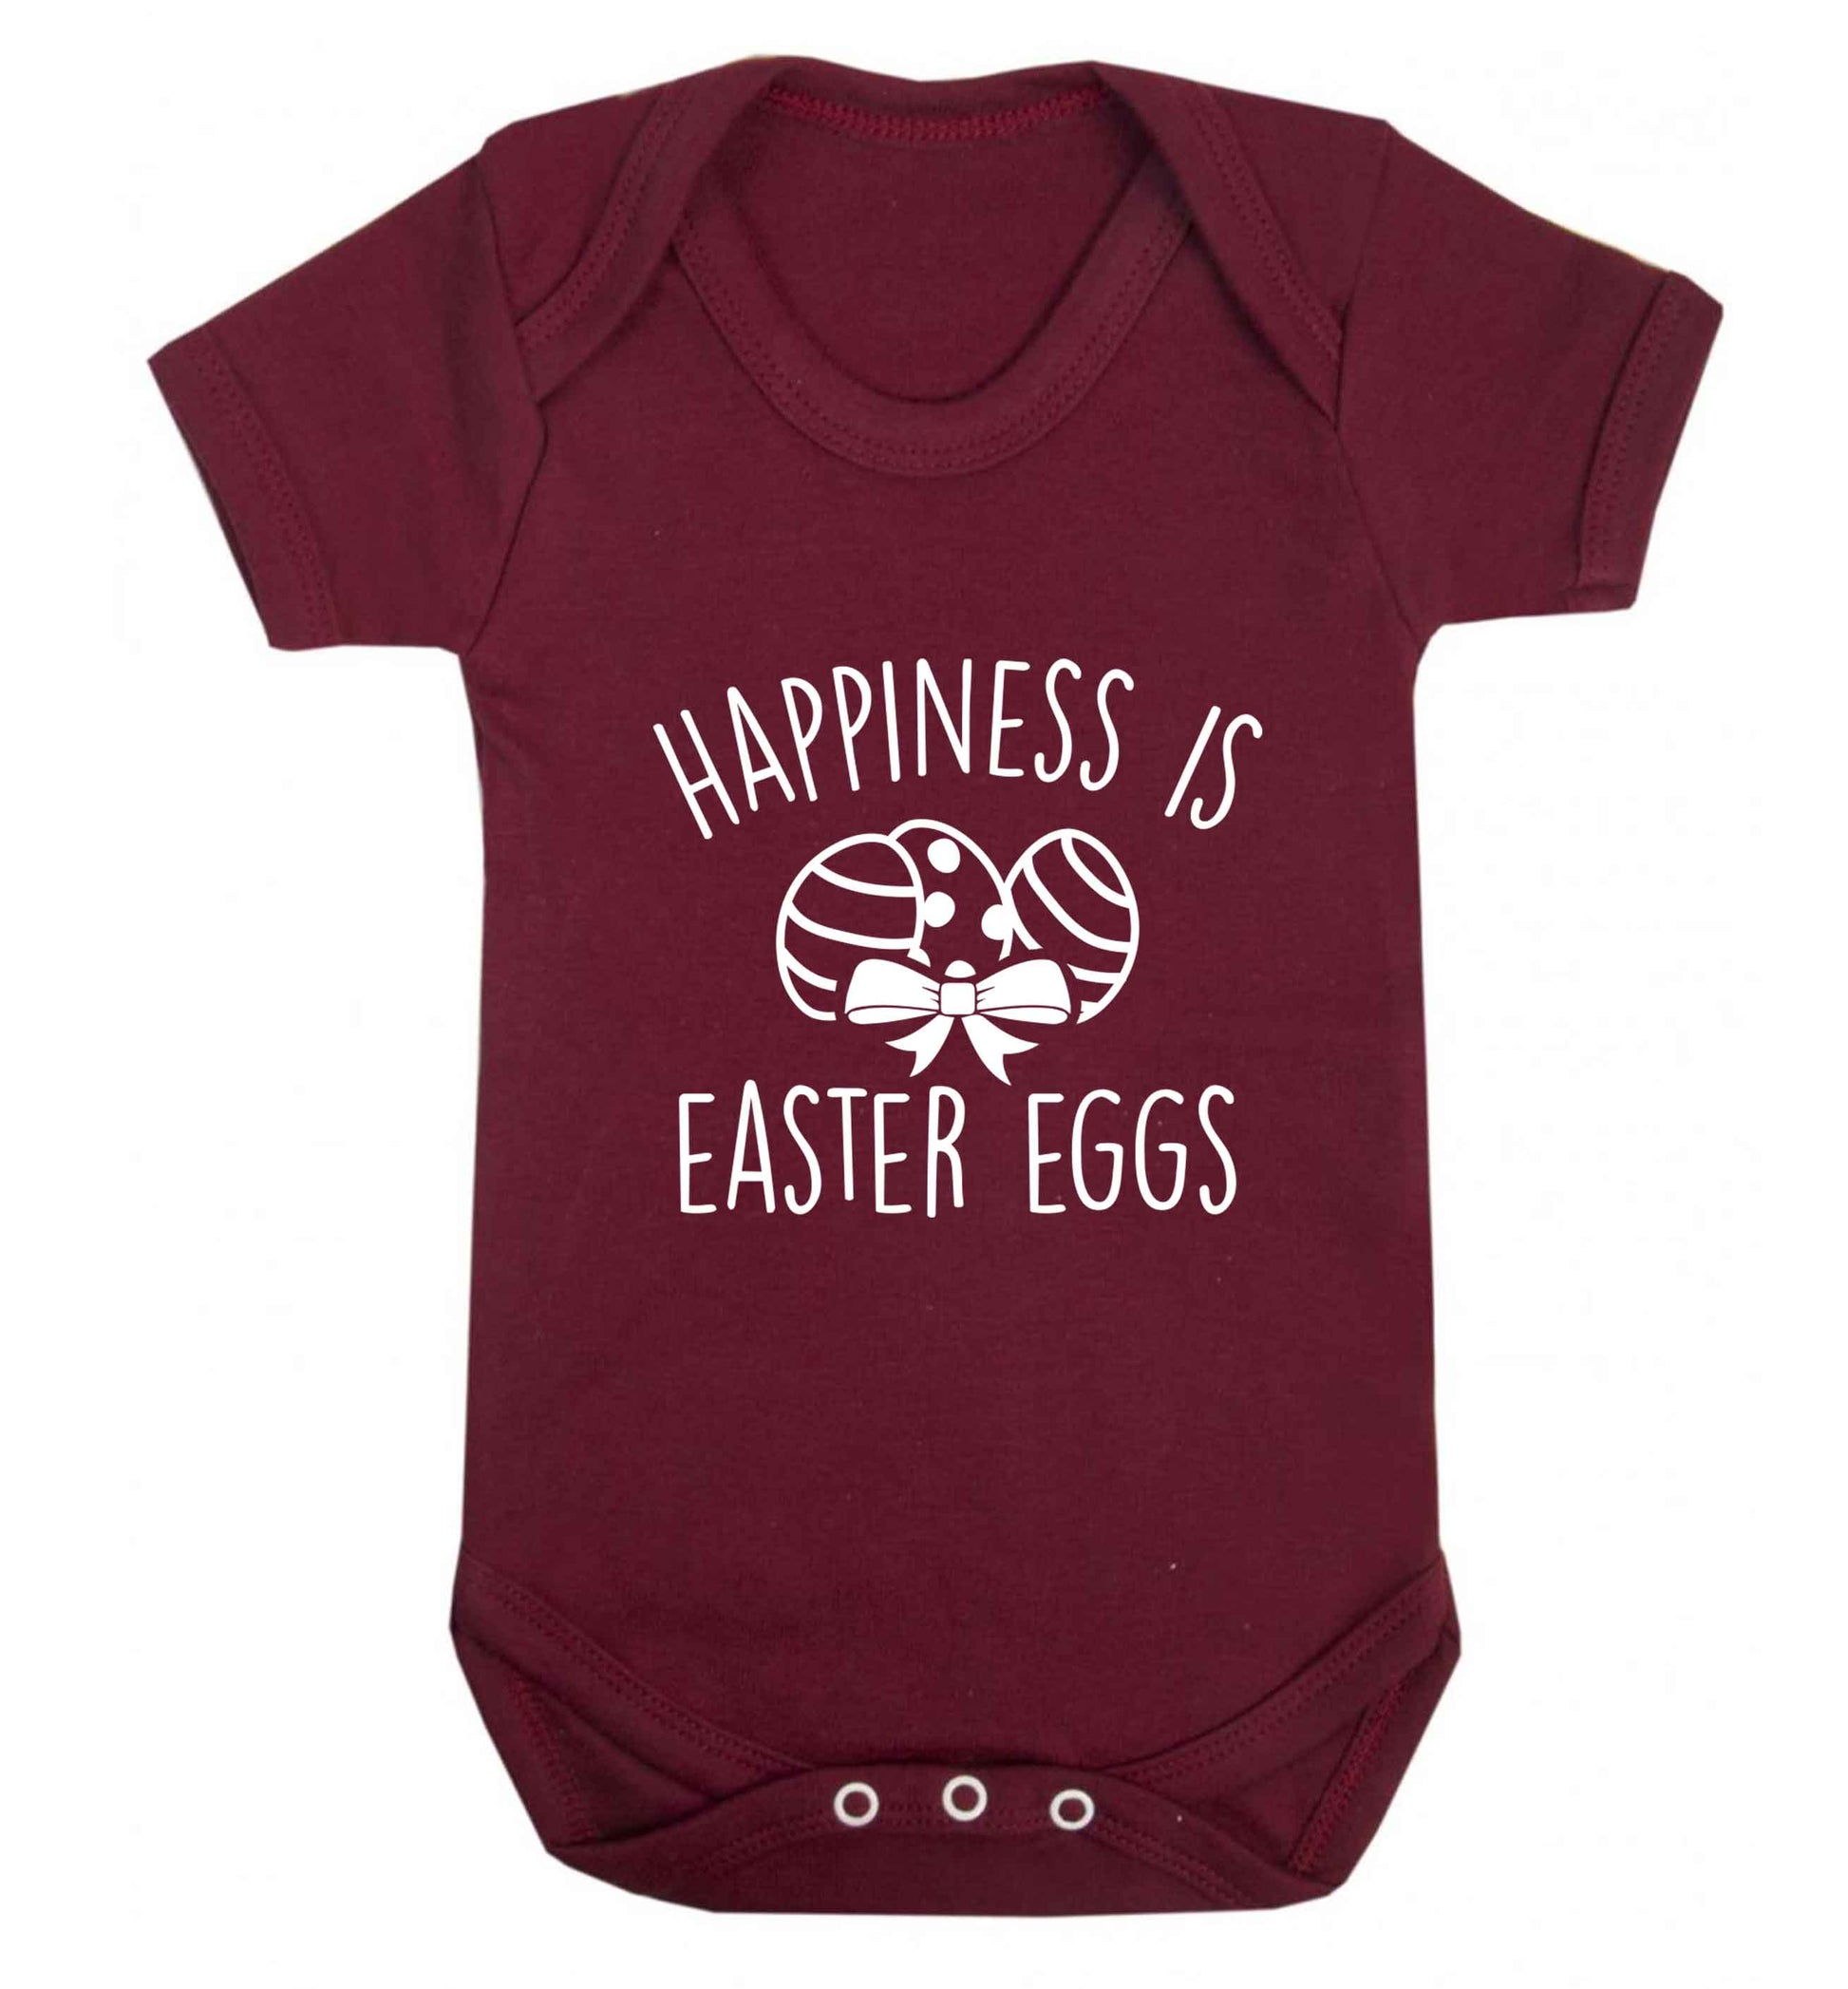 Happiness is Easter eggs baby vest maroon 18-24 months